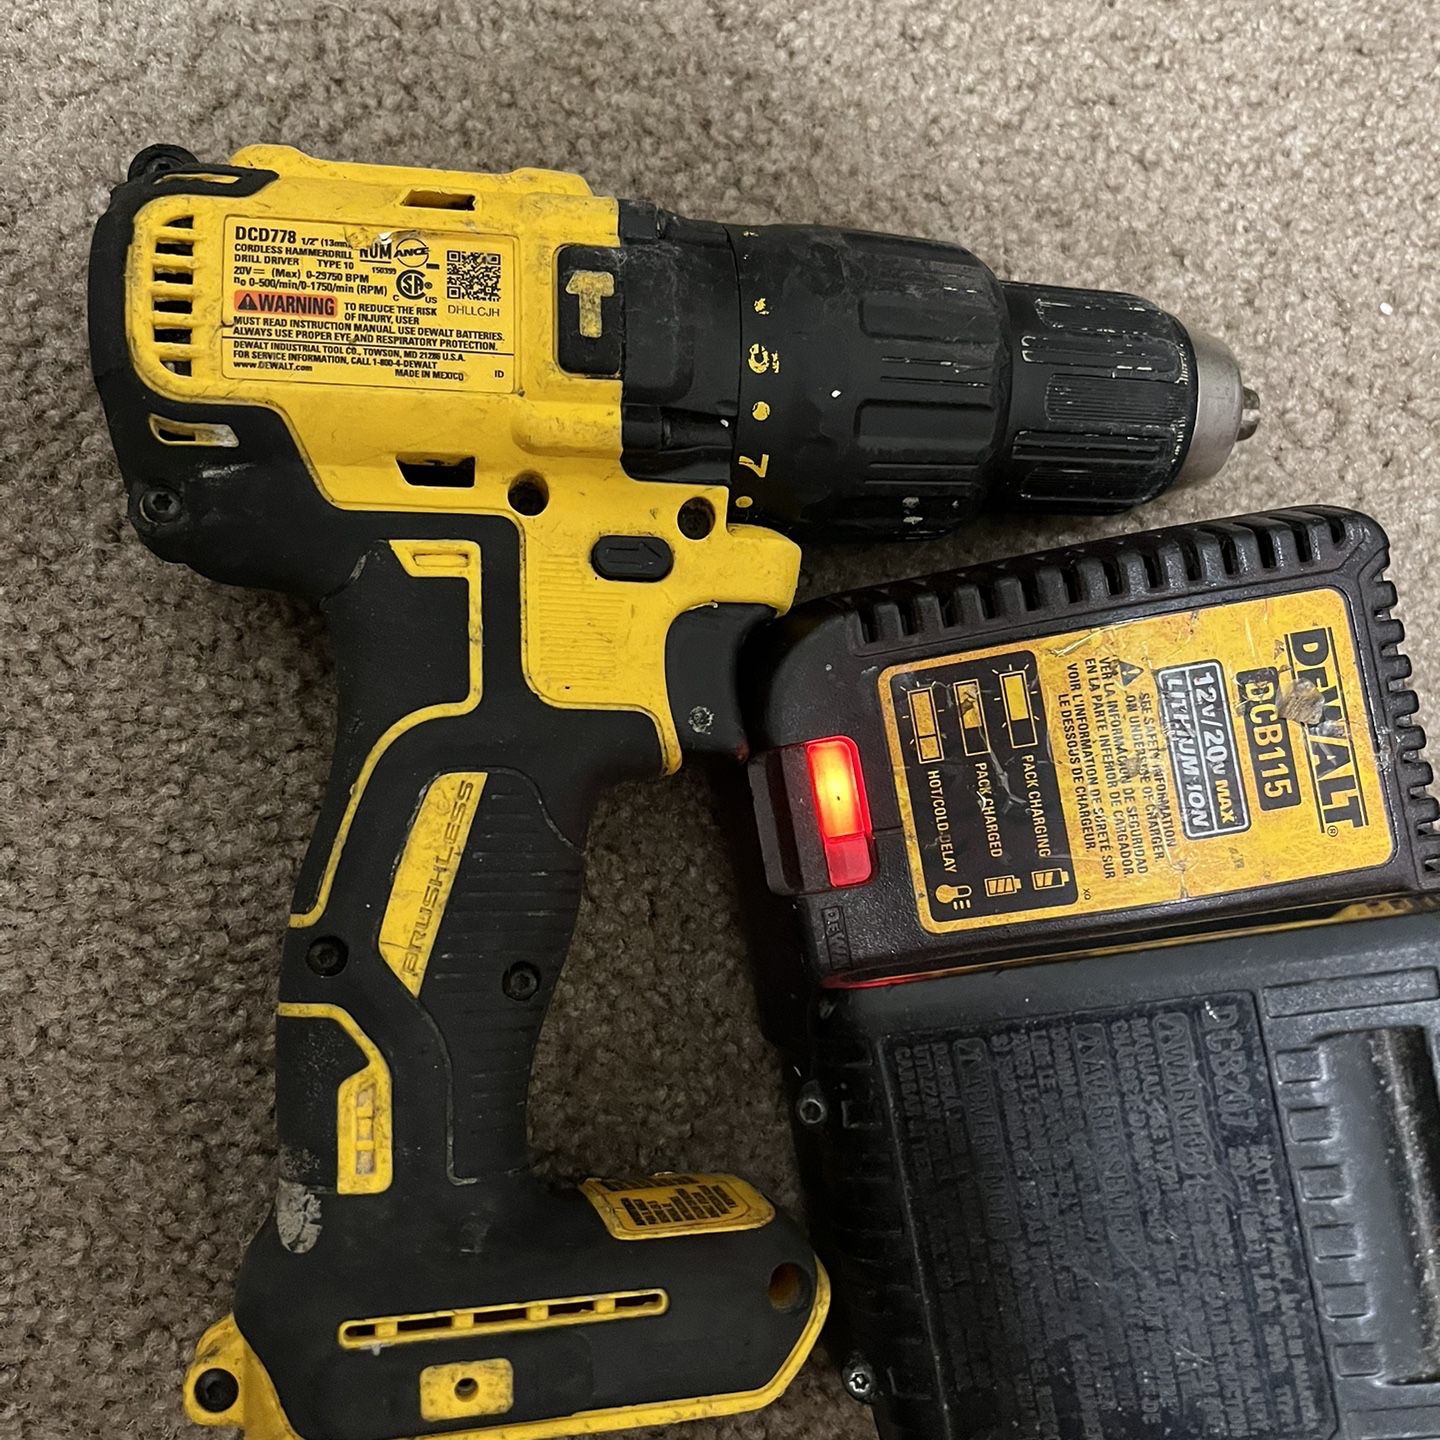 Dewalt Drill, Battery Charger And 20v Max Battery.